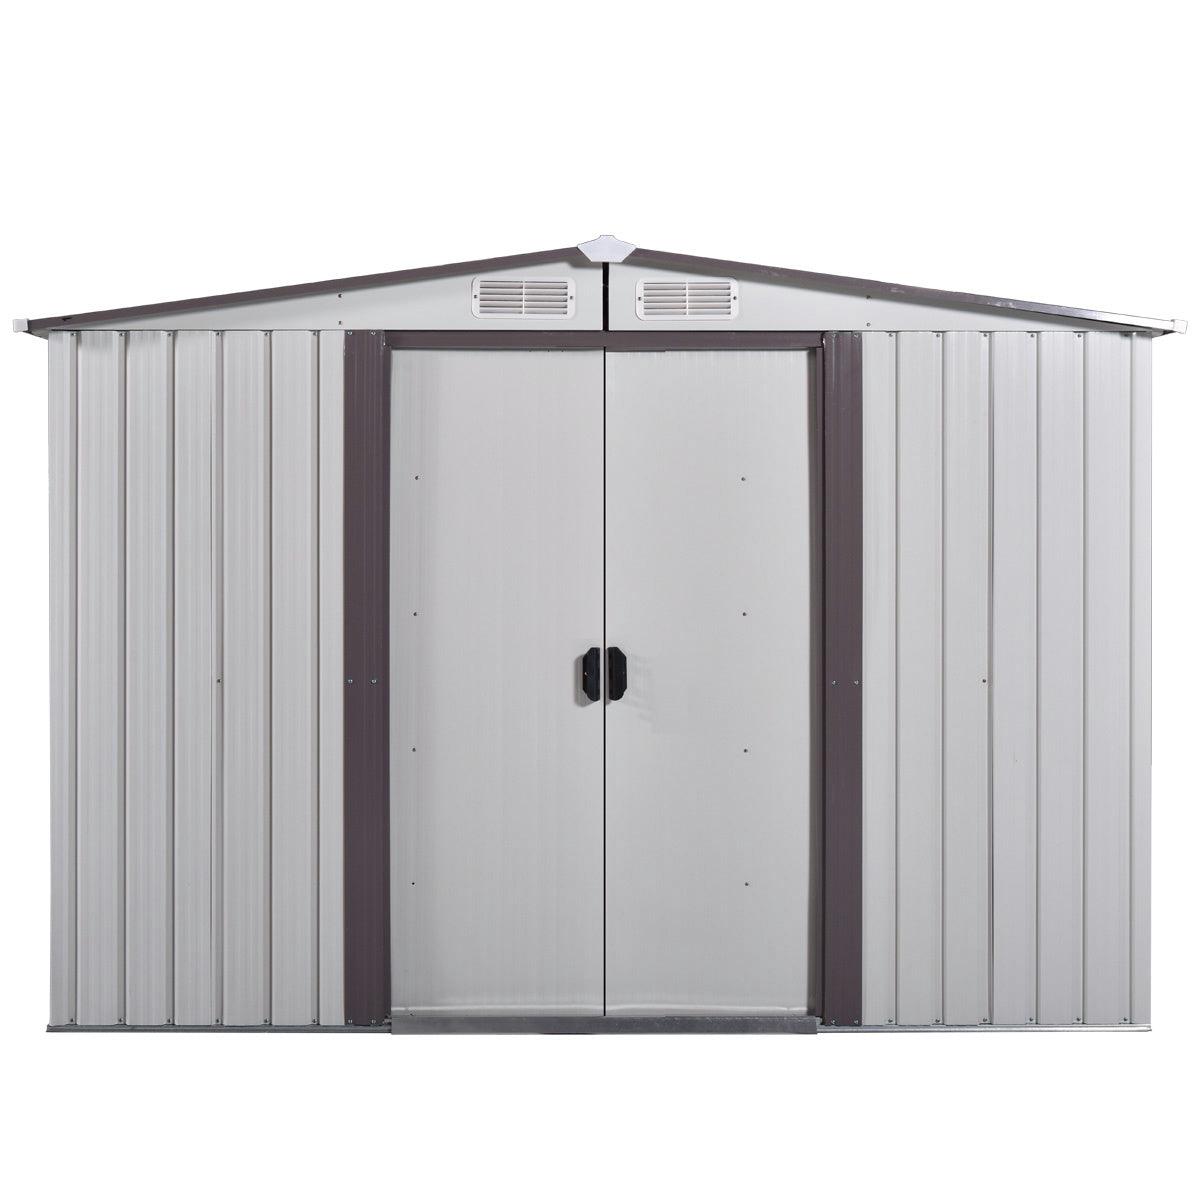 8' x 8'ft Outdoor Storage Shed Kit-Perfect to Store Patio Furniture, Garden Tools Bike Accessories, Beach Chairs and Lawn Mower XH